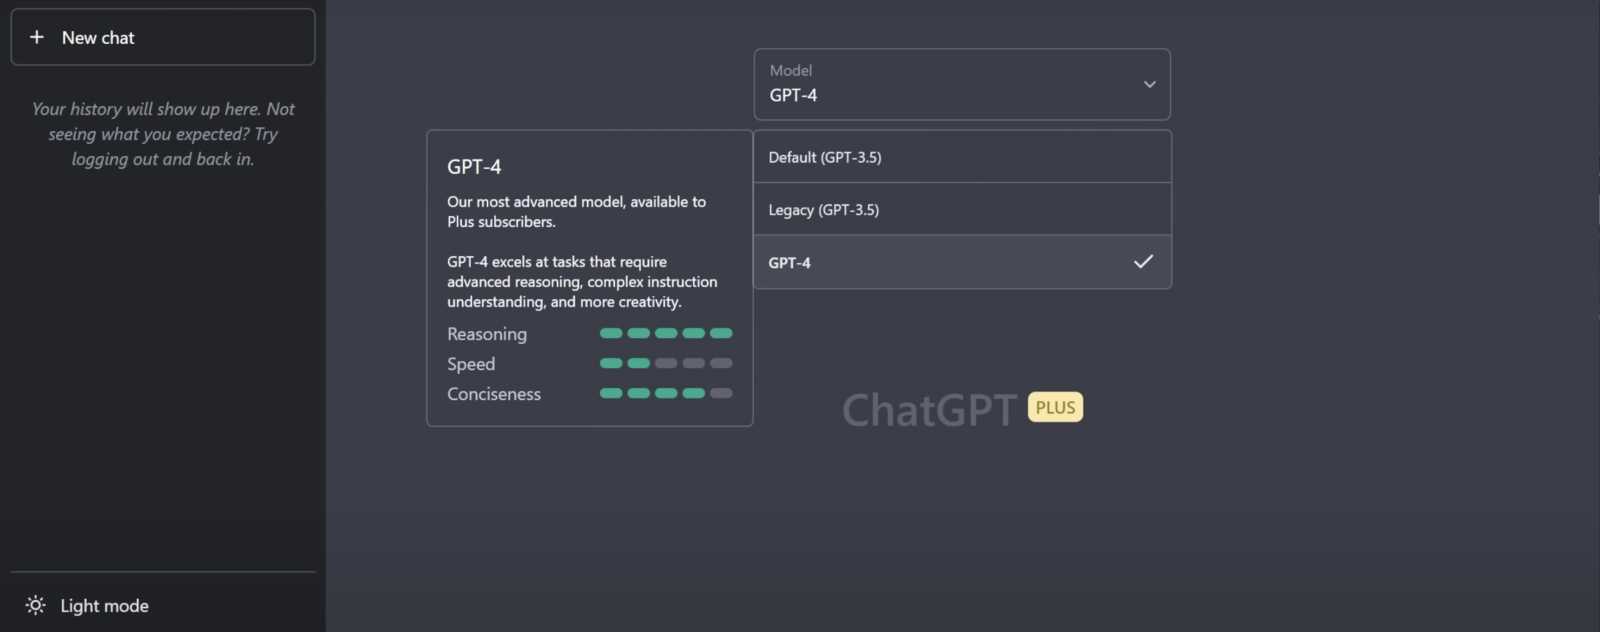 How to use the GPT-4 model on ChatGPT